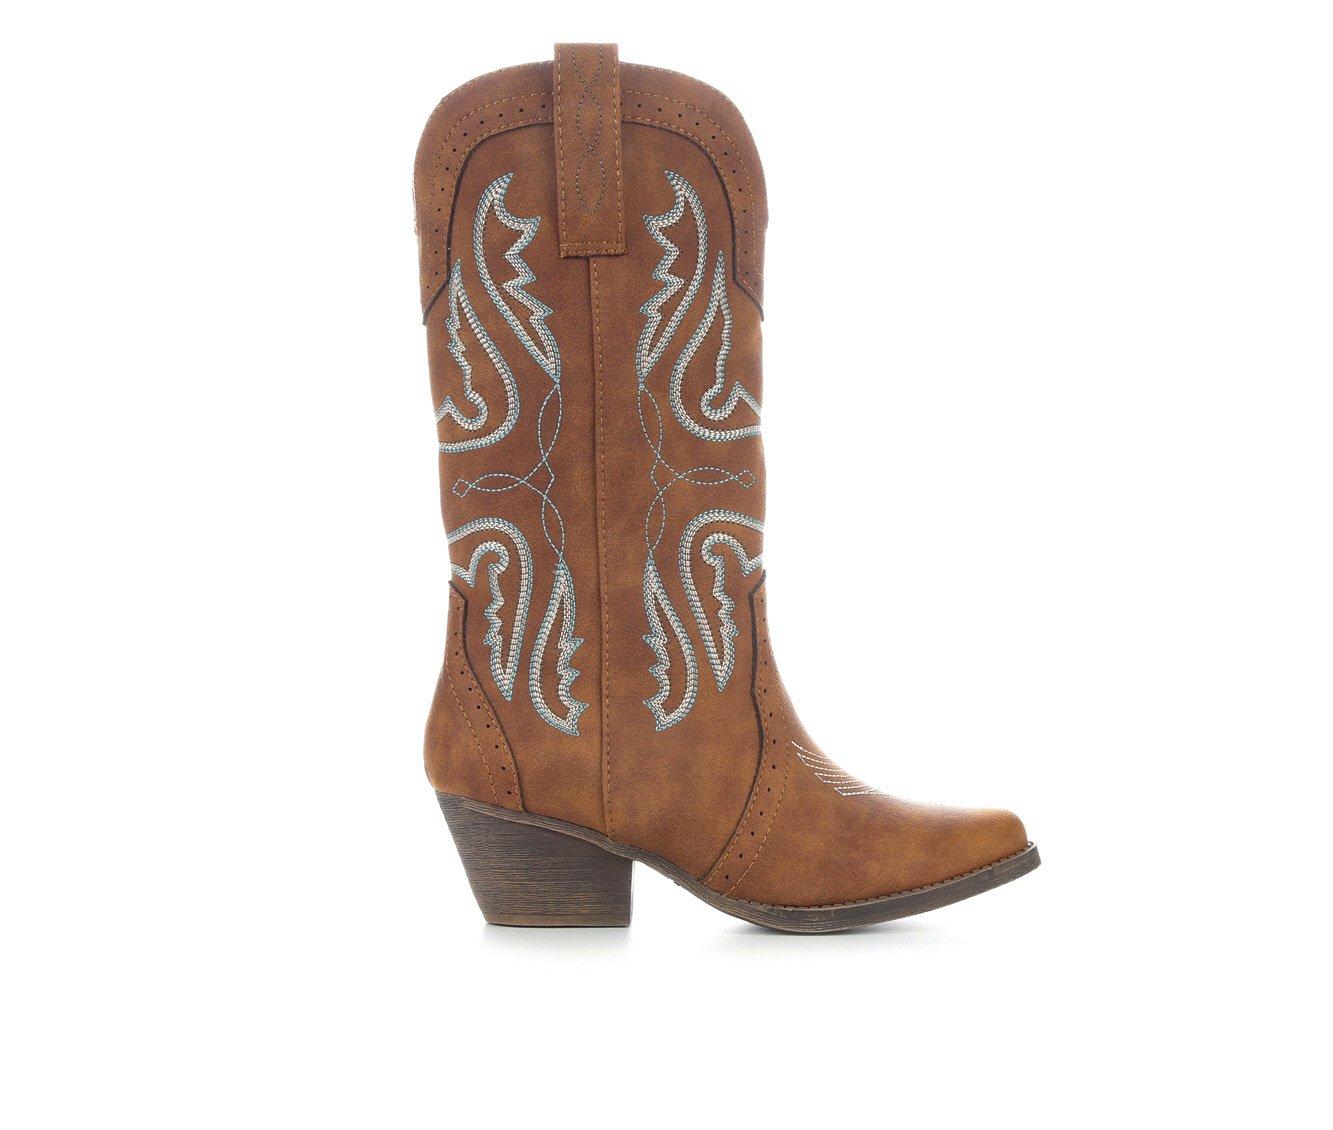 Women's Western Boots, Cowgirl Boots